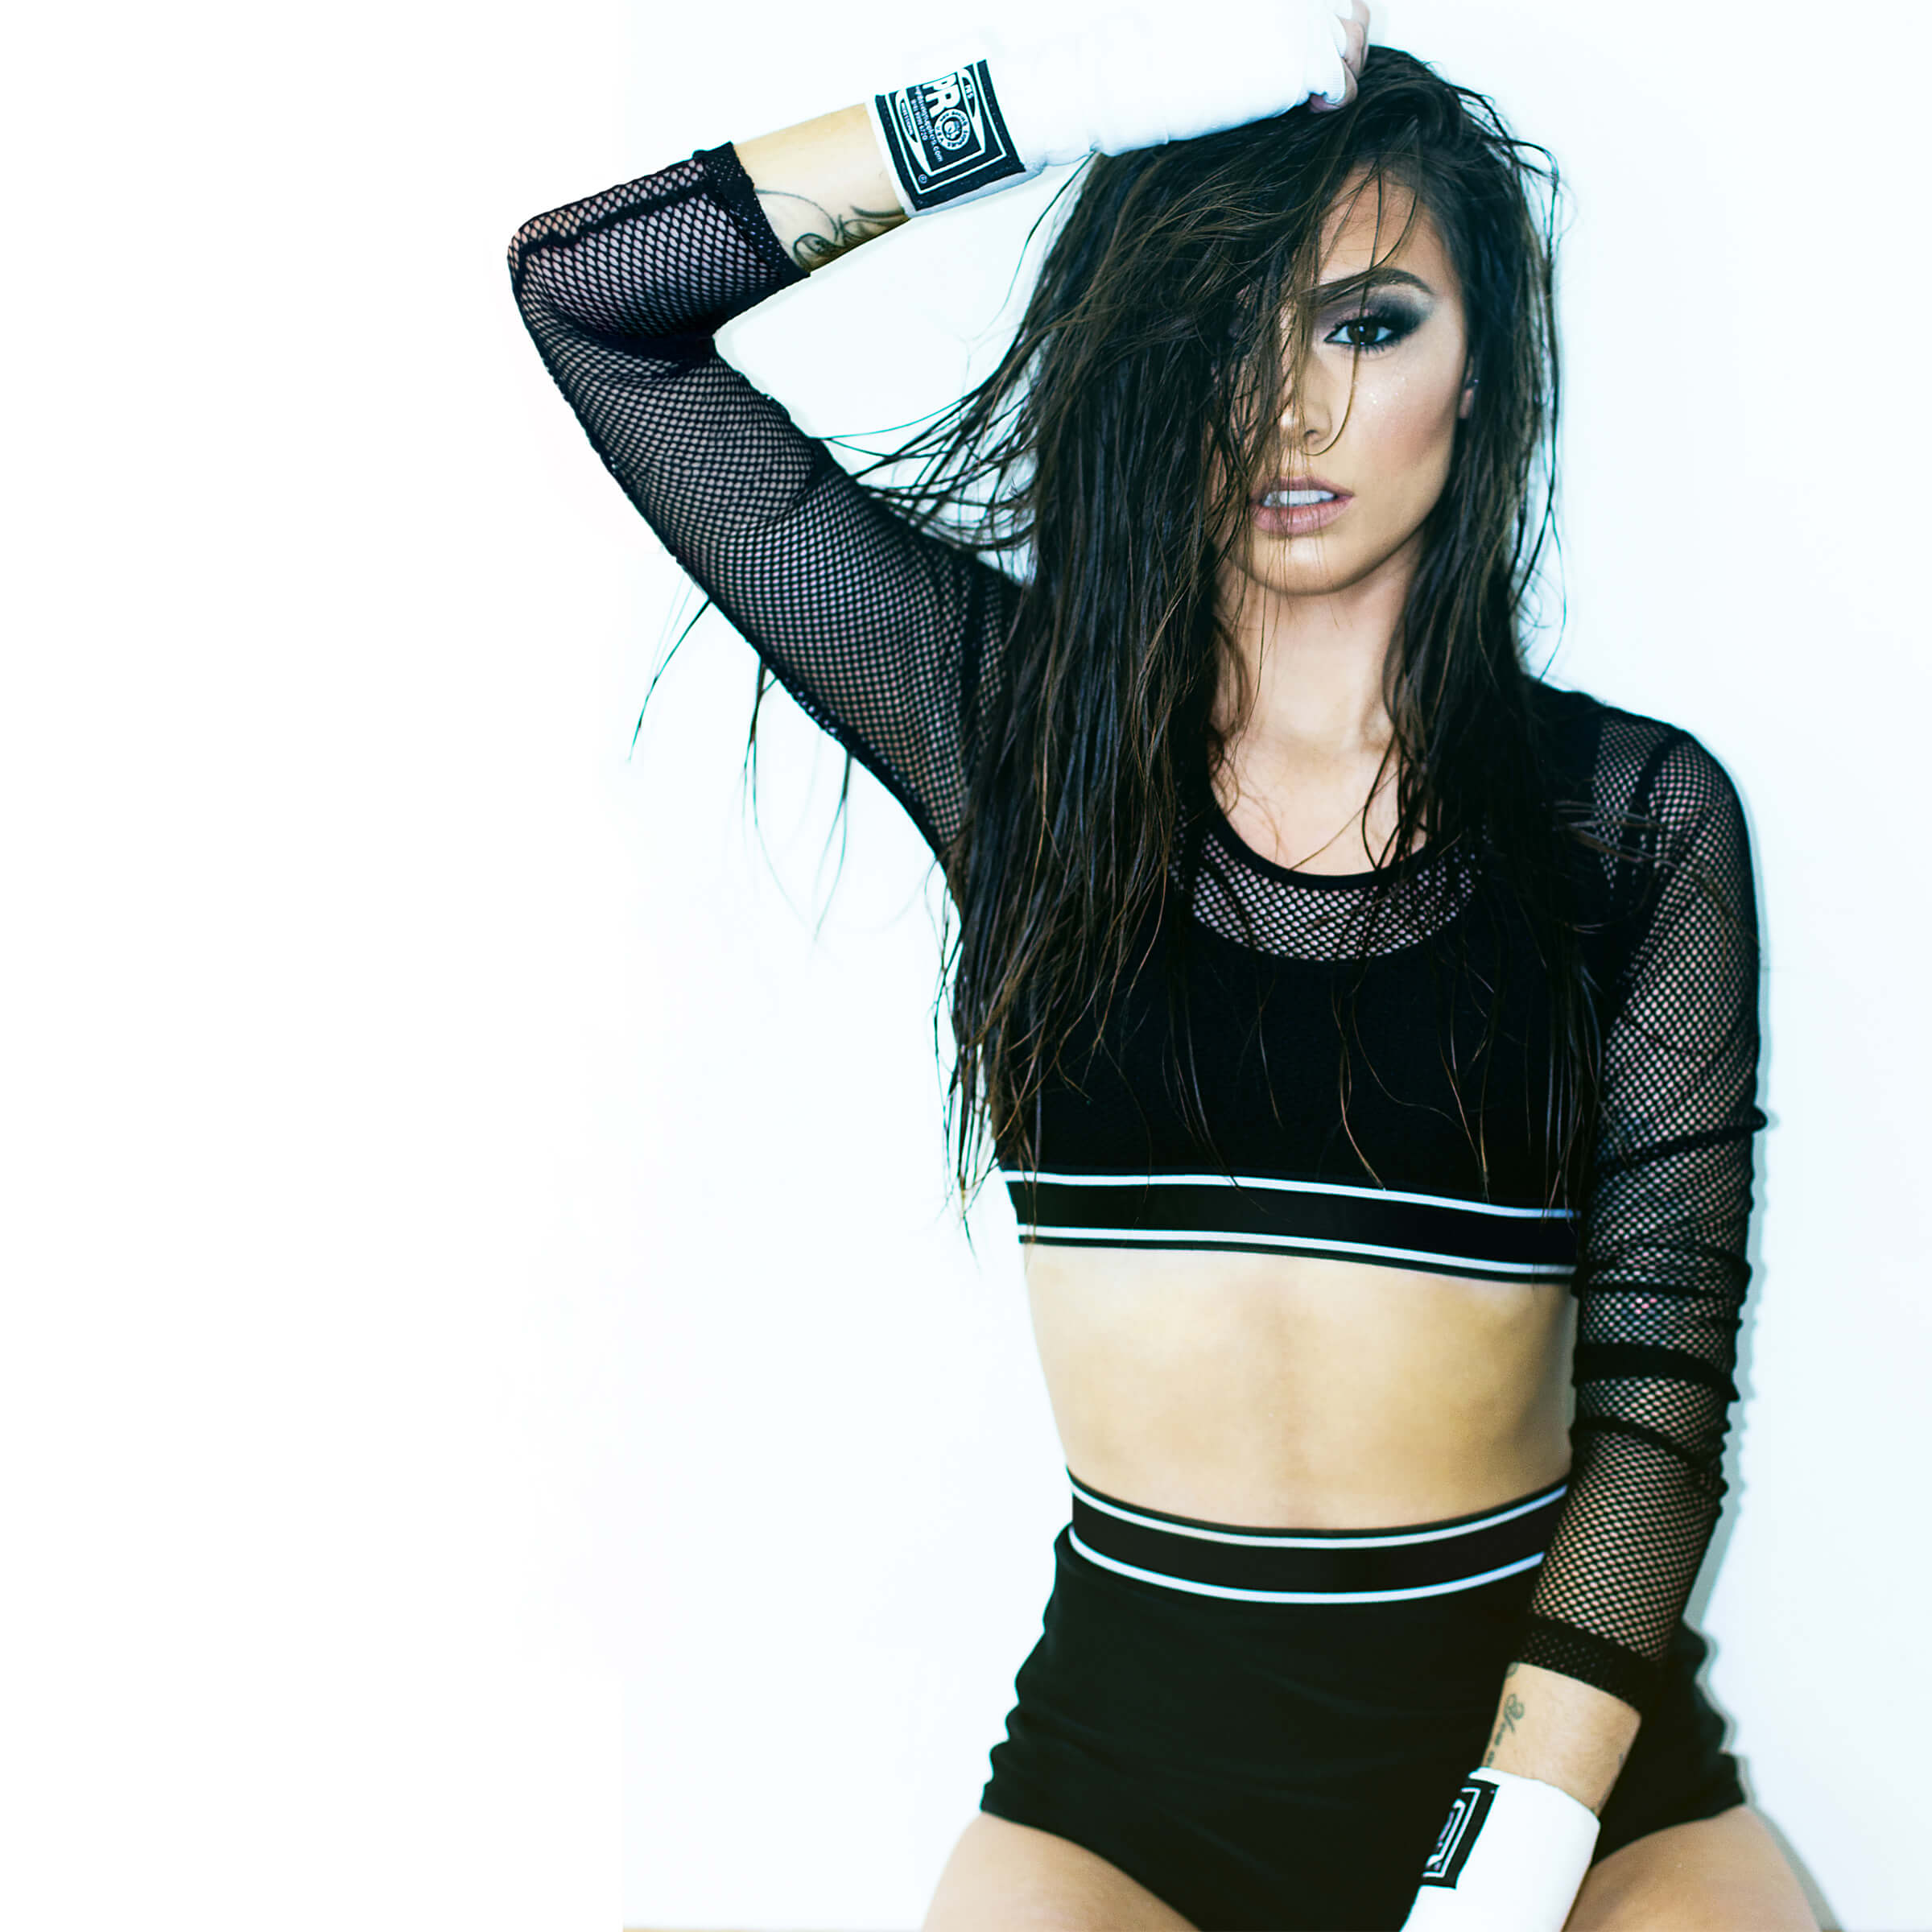 Exclusive Interview: The Reinvention of Cher Lloyd